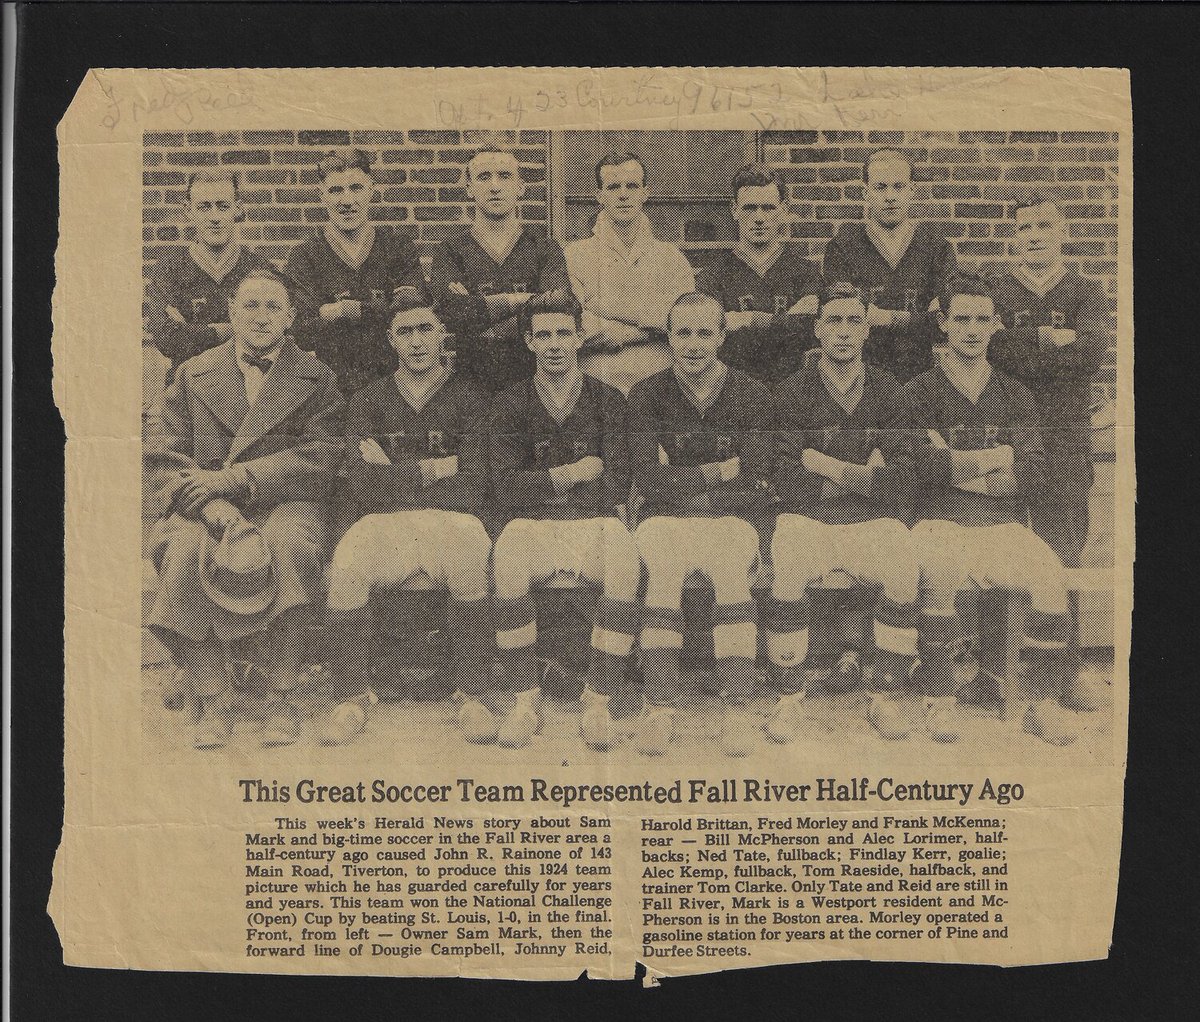 The 1923/24 season was to see the Marksmen dominate the league losing only twice all season ( to Steel!) and finally finish 6 points ahead of Bethlehem and be crowned inaugural ASL ( American Soccer League) champions!  #MarksmenMarch